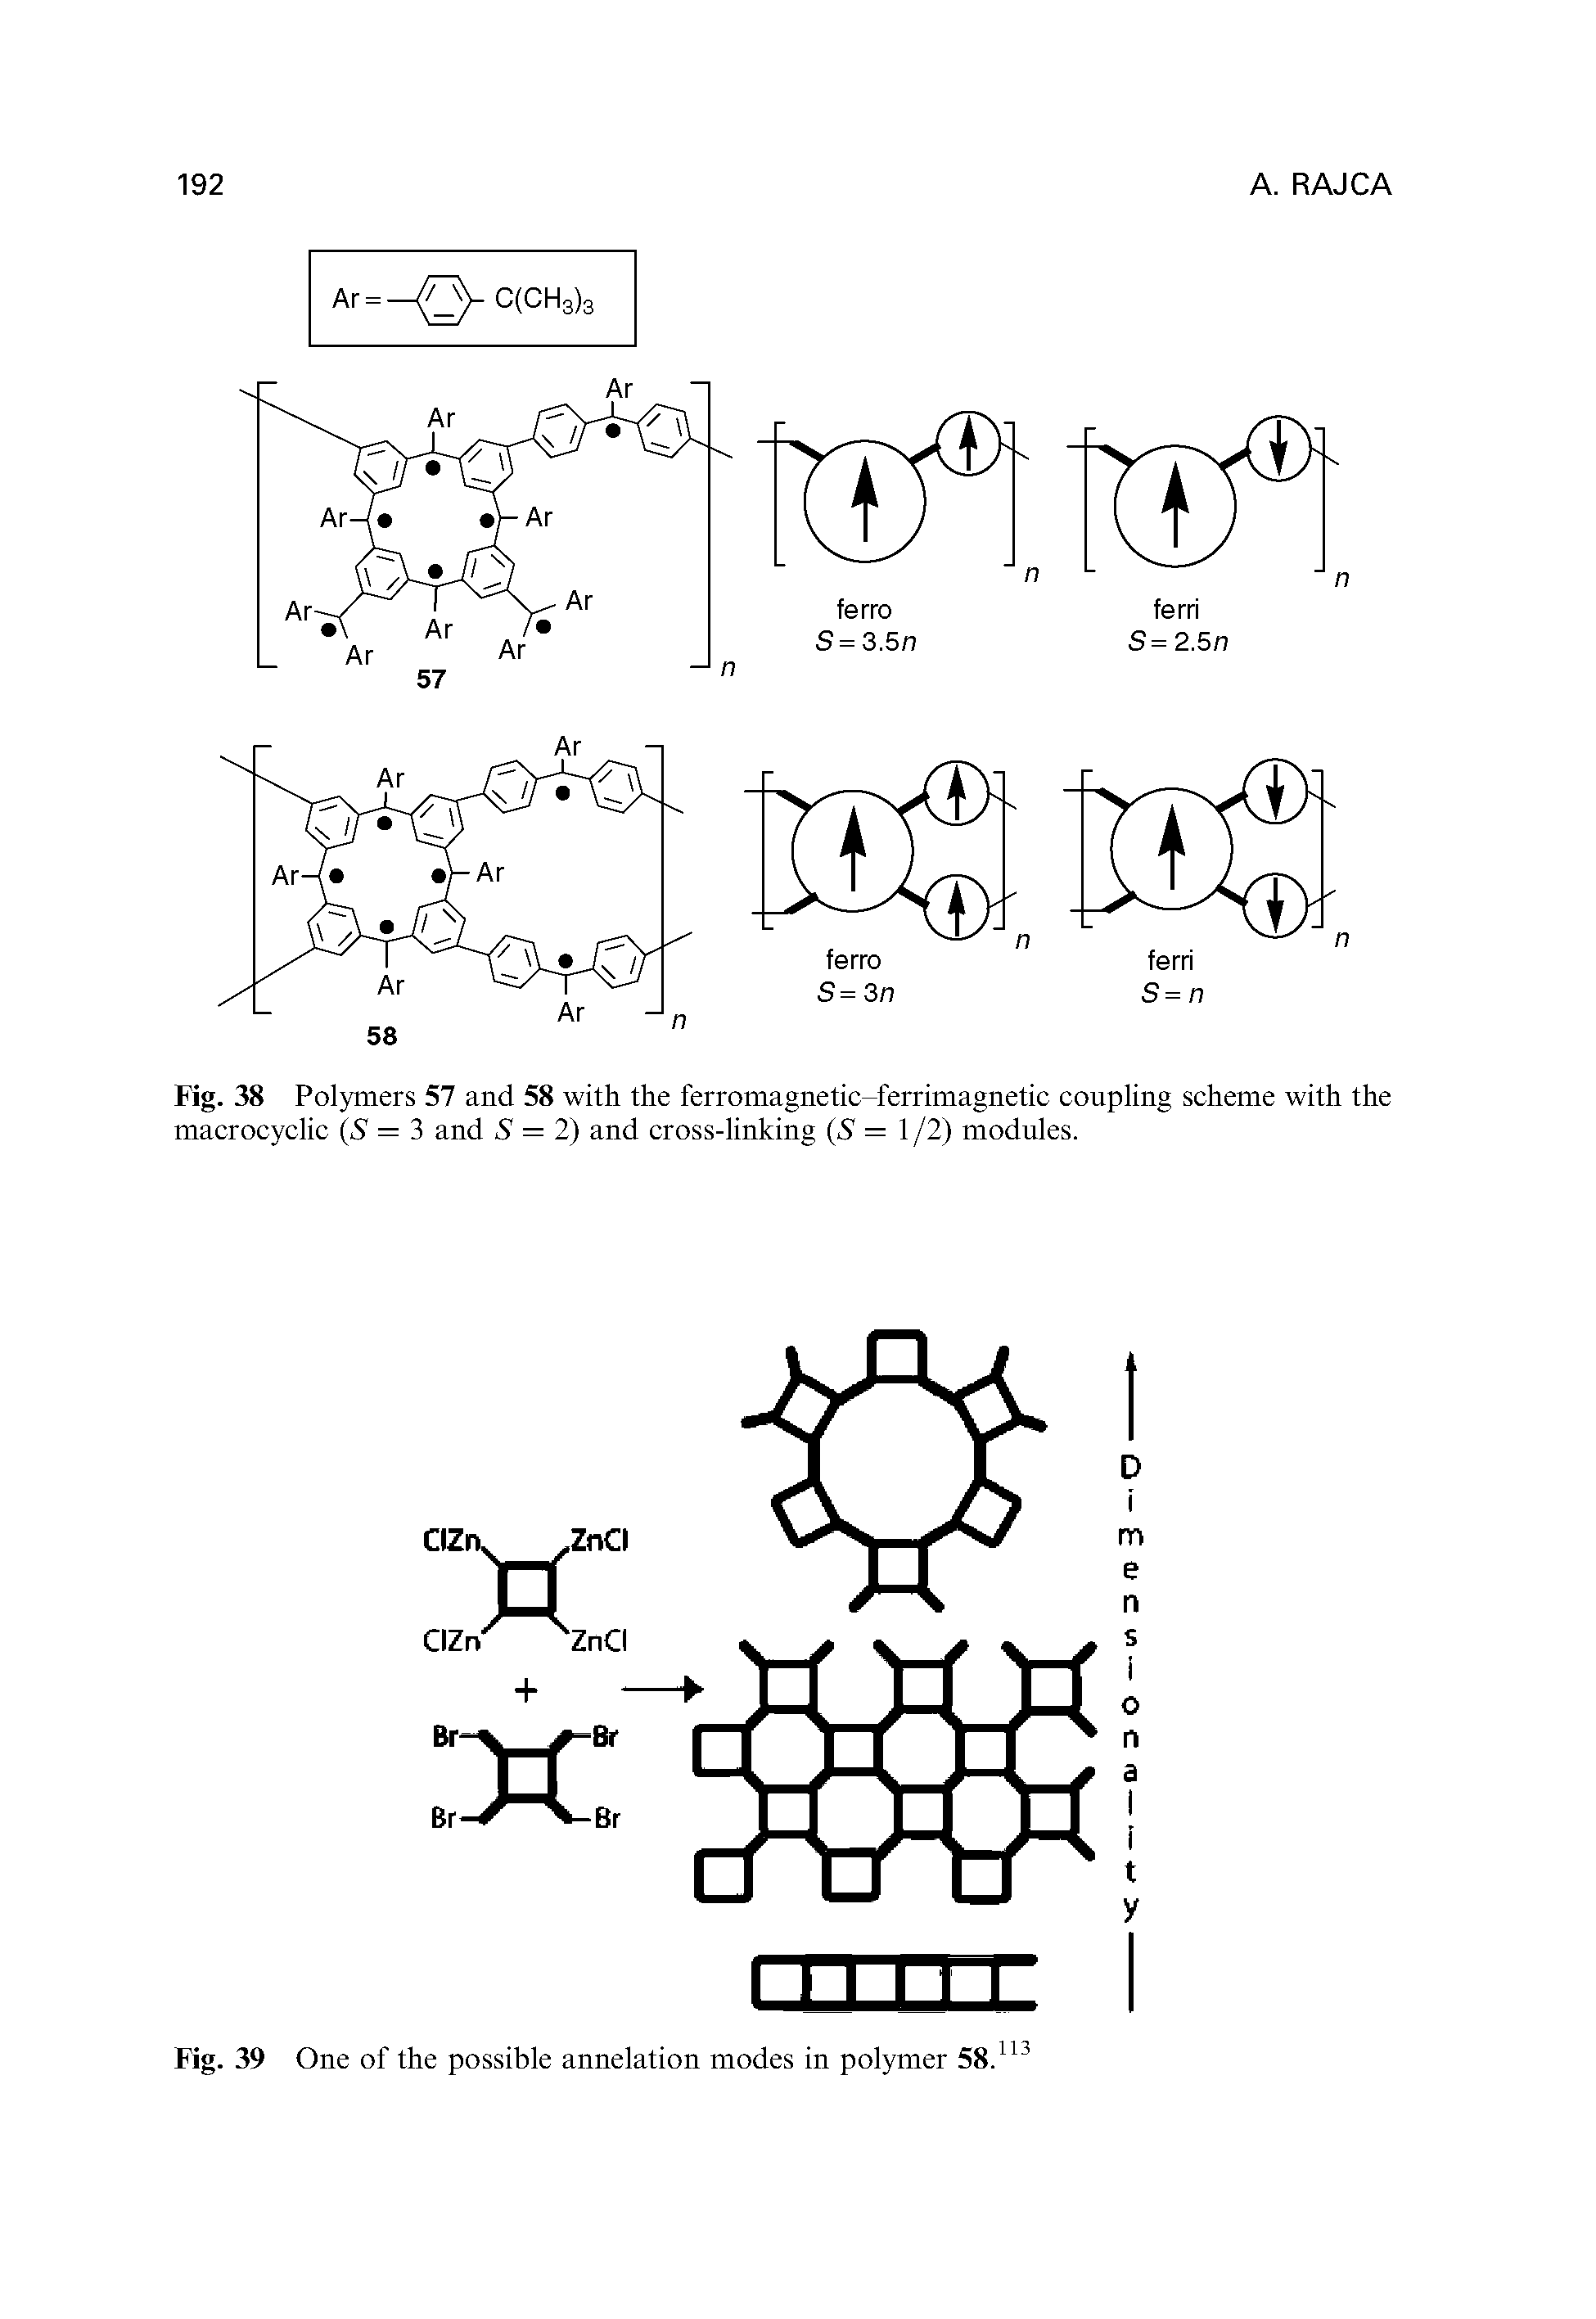 Fig. 38 Polymers 57 and 58 with the ferromagnetic-ferrimagnetic coupling scheme with the macrocyclic (S — 3 and 5 = 2) and cross-linking (5=1 /2) modules.